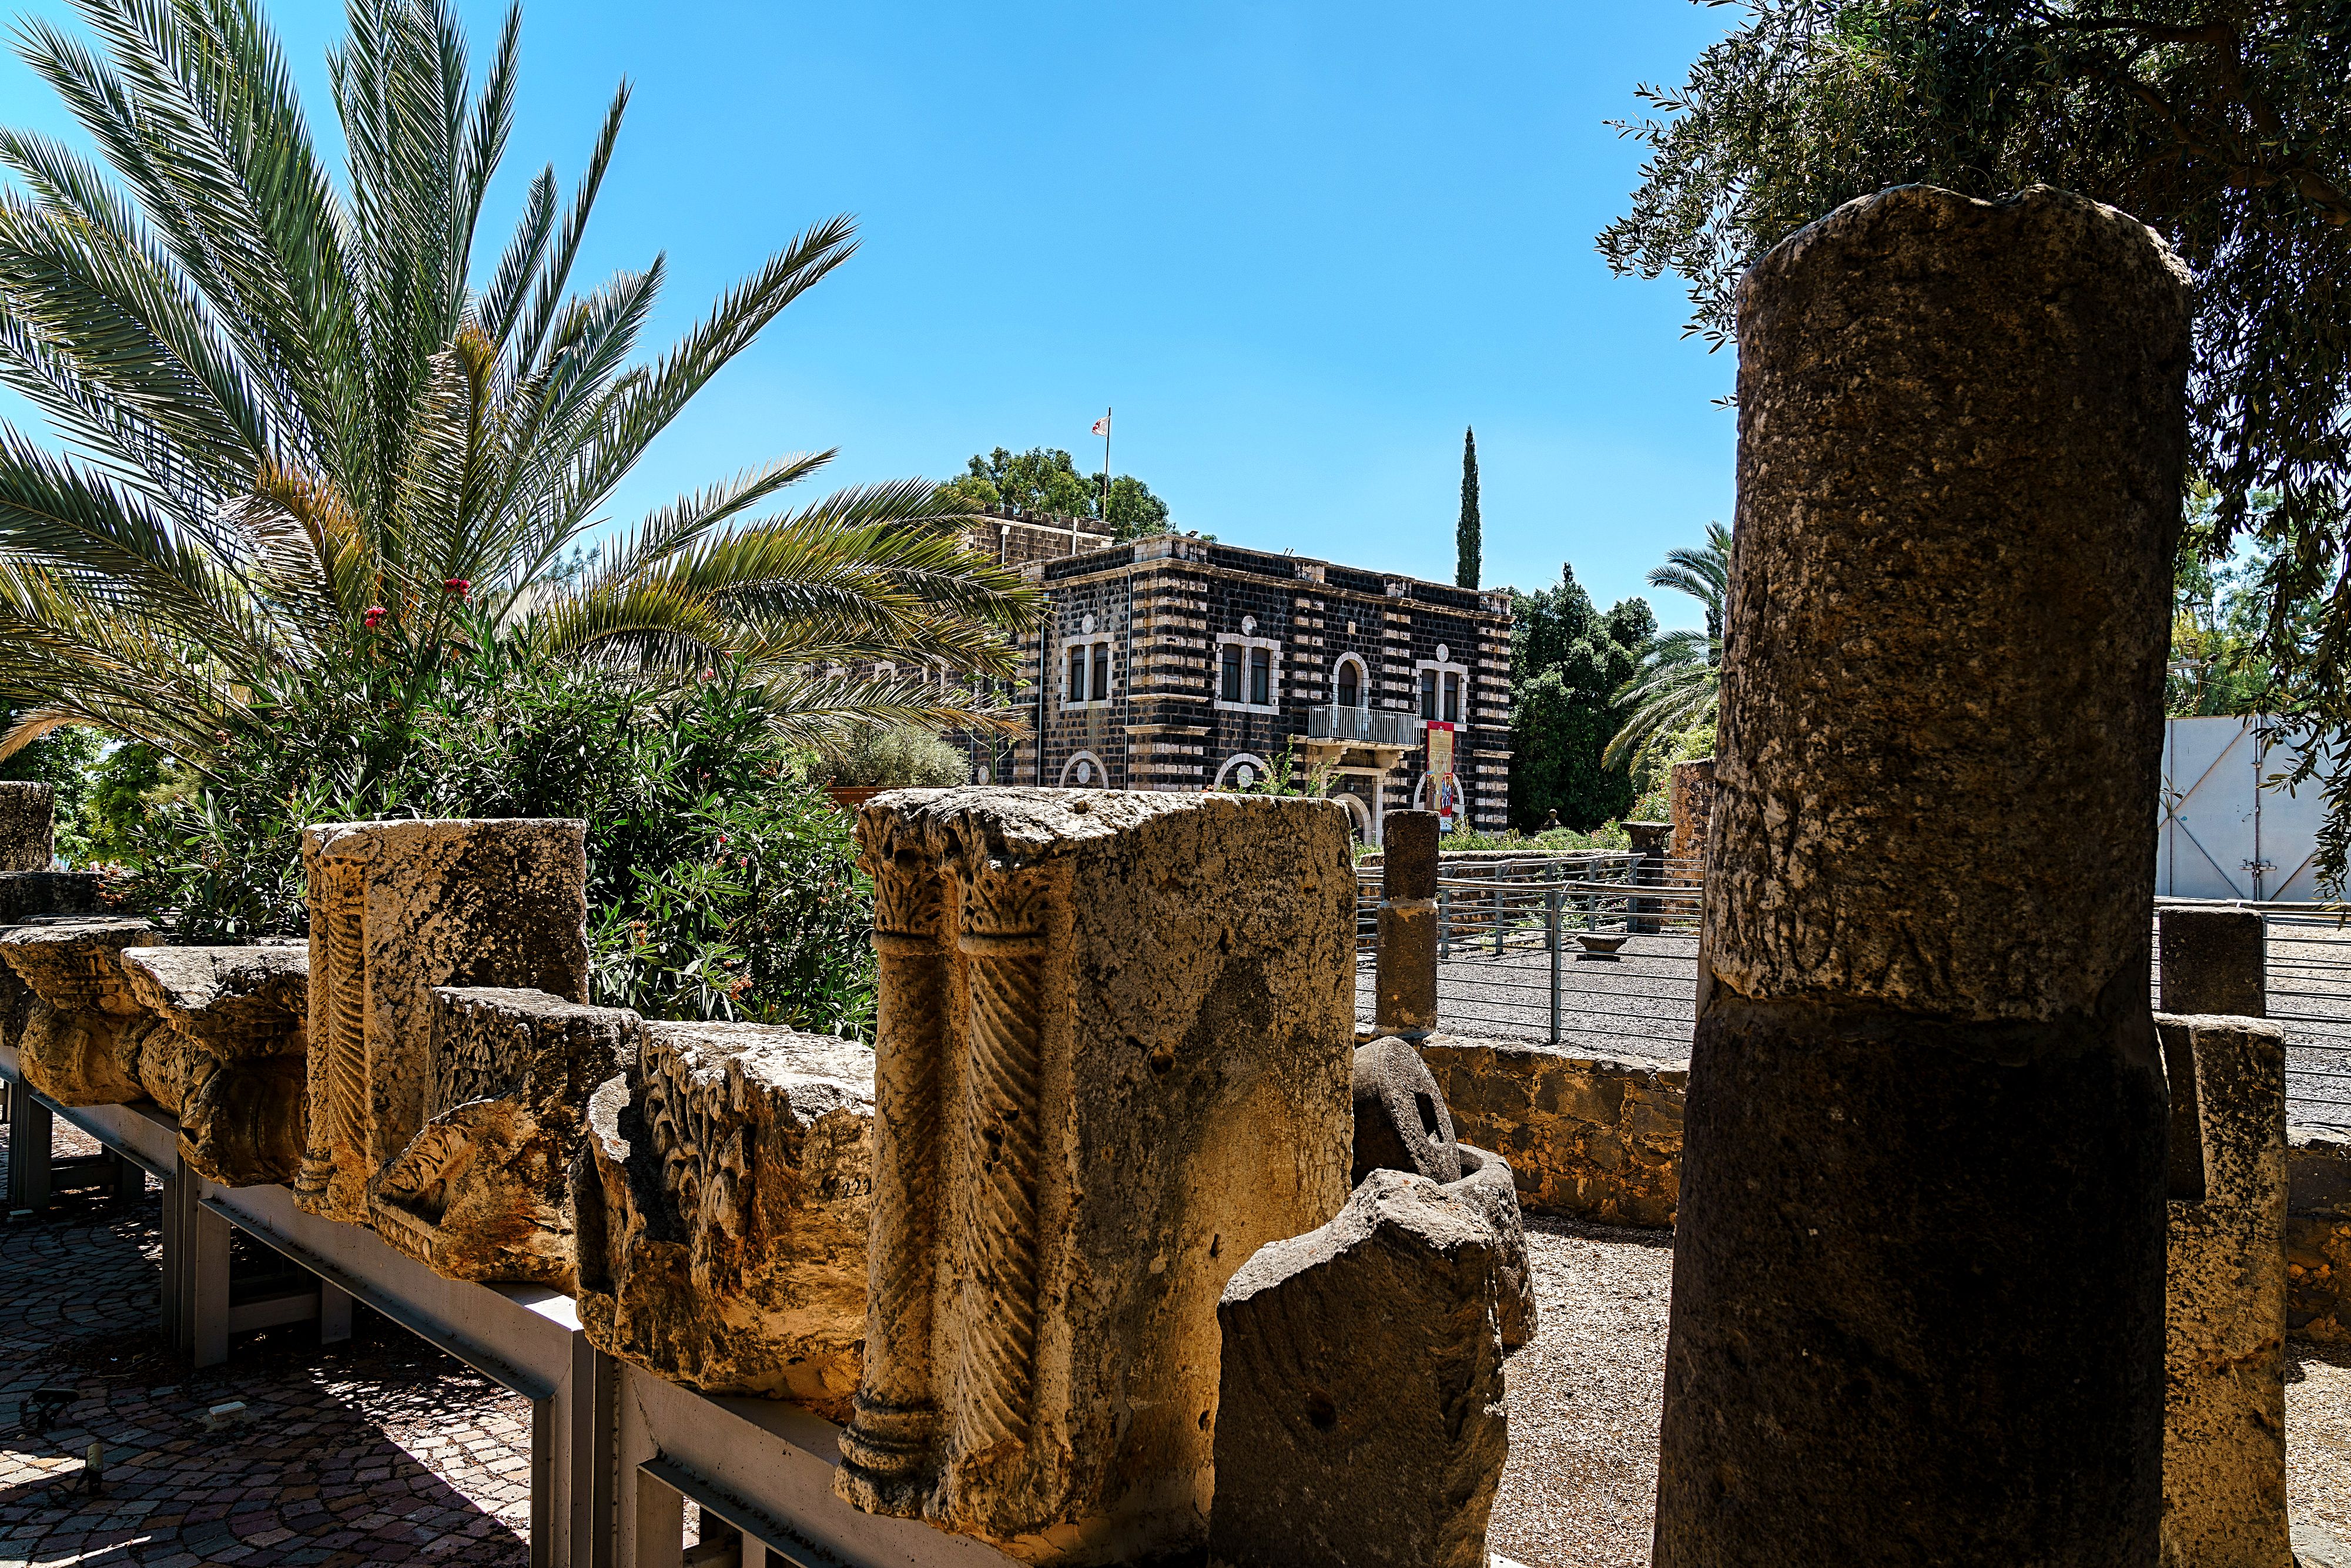 Capernaum, established during the time of the Hasmoneans, Israel. 